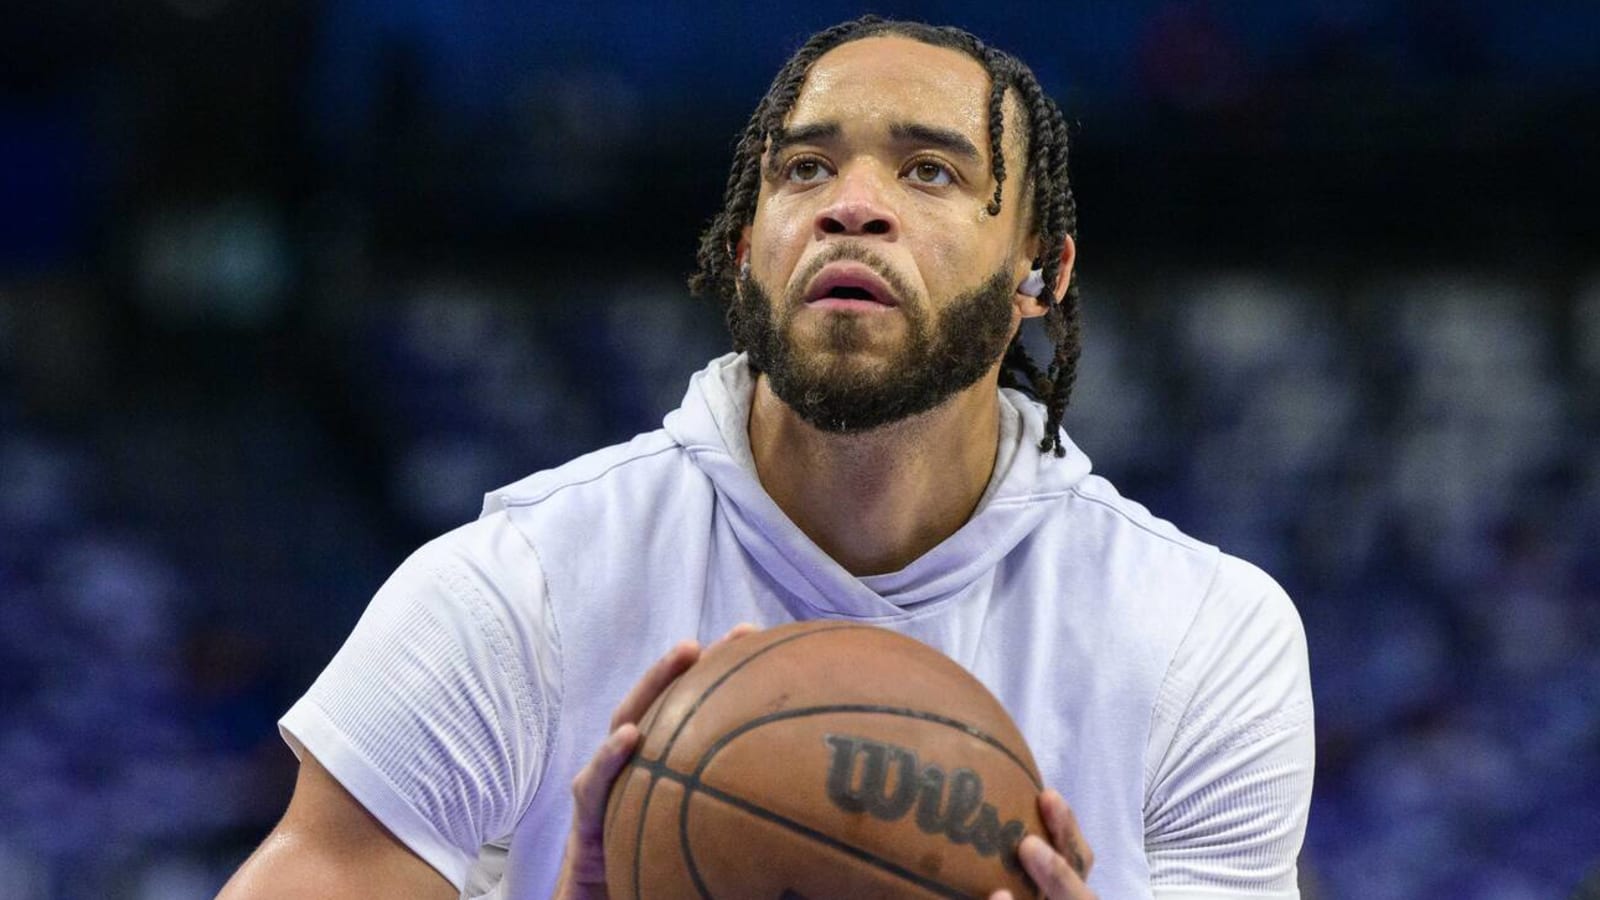 Report: Suns' JaVale McGee agreed to deal with Dallas Mavericks